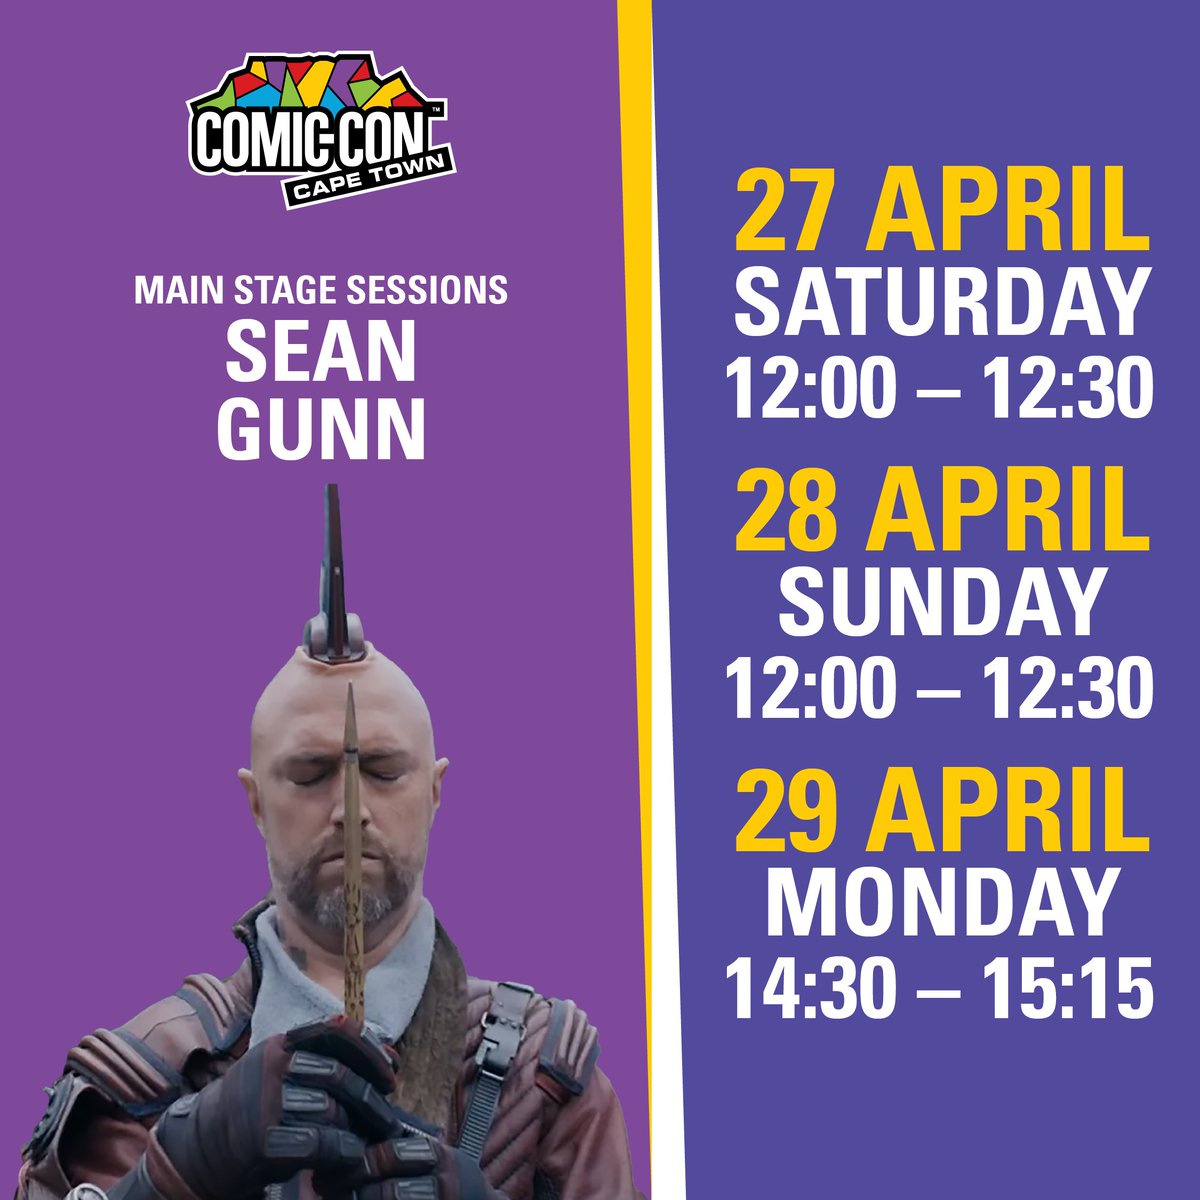 ICYMI Here is a recap of the stage sessions for the amazing international Film & Series guests attending Comic Con Cape Town 😊👏 NB: Times are subject to change Don’t forget about those photo op and autograph sessions available through Howler!